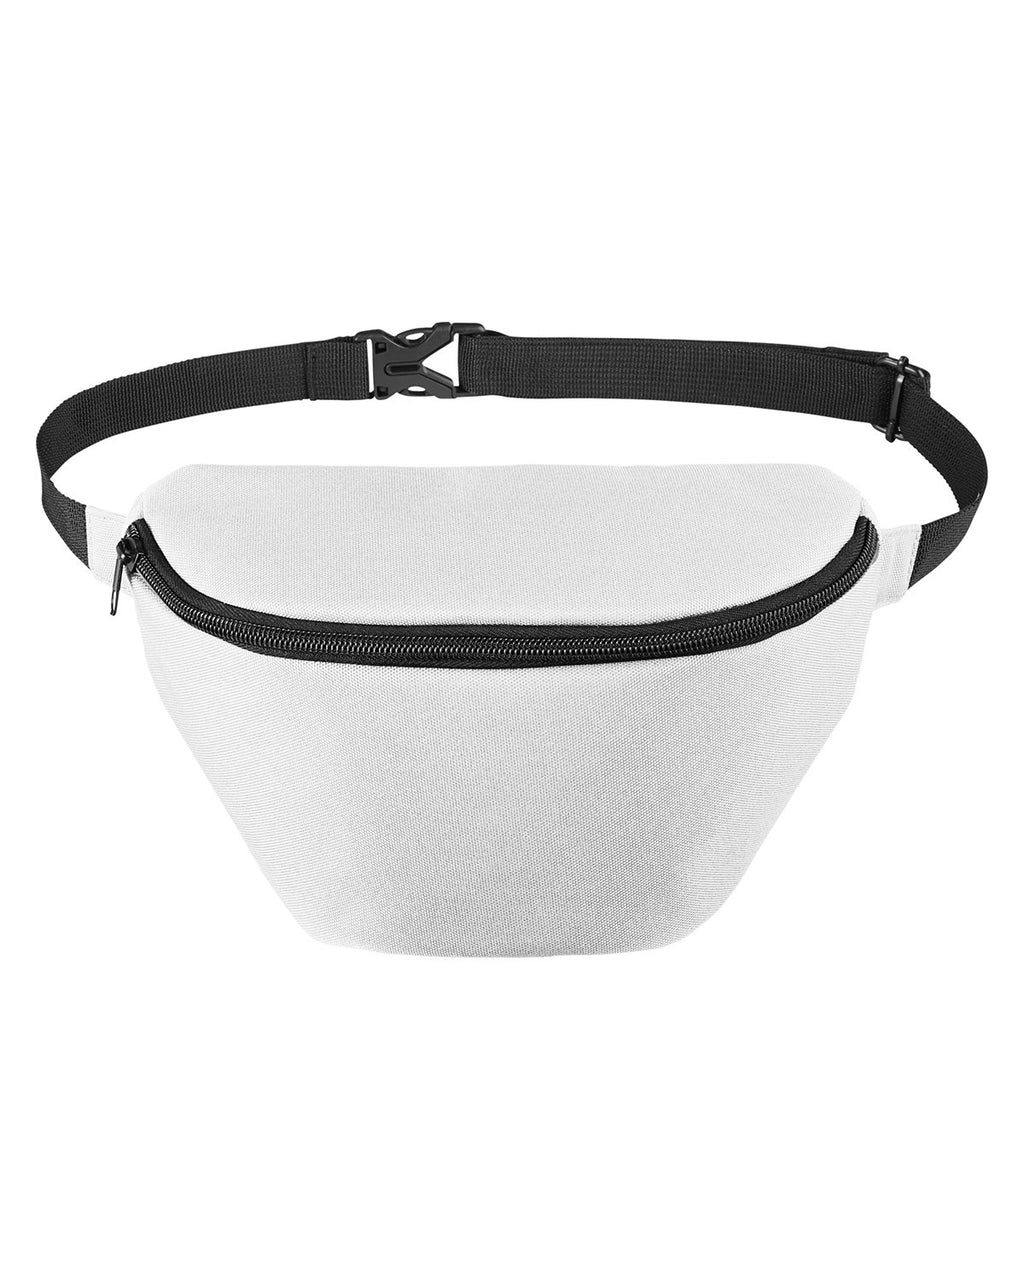 BE260-BAGedge Fanny Pack